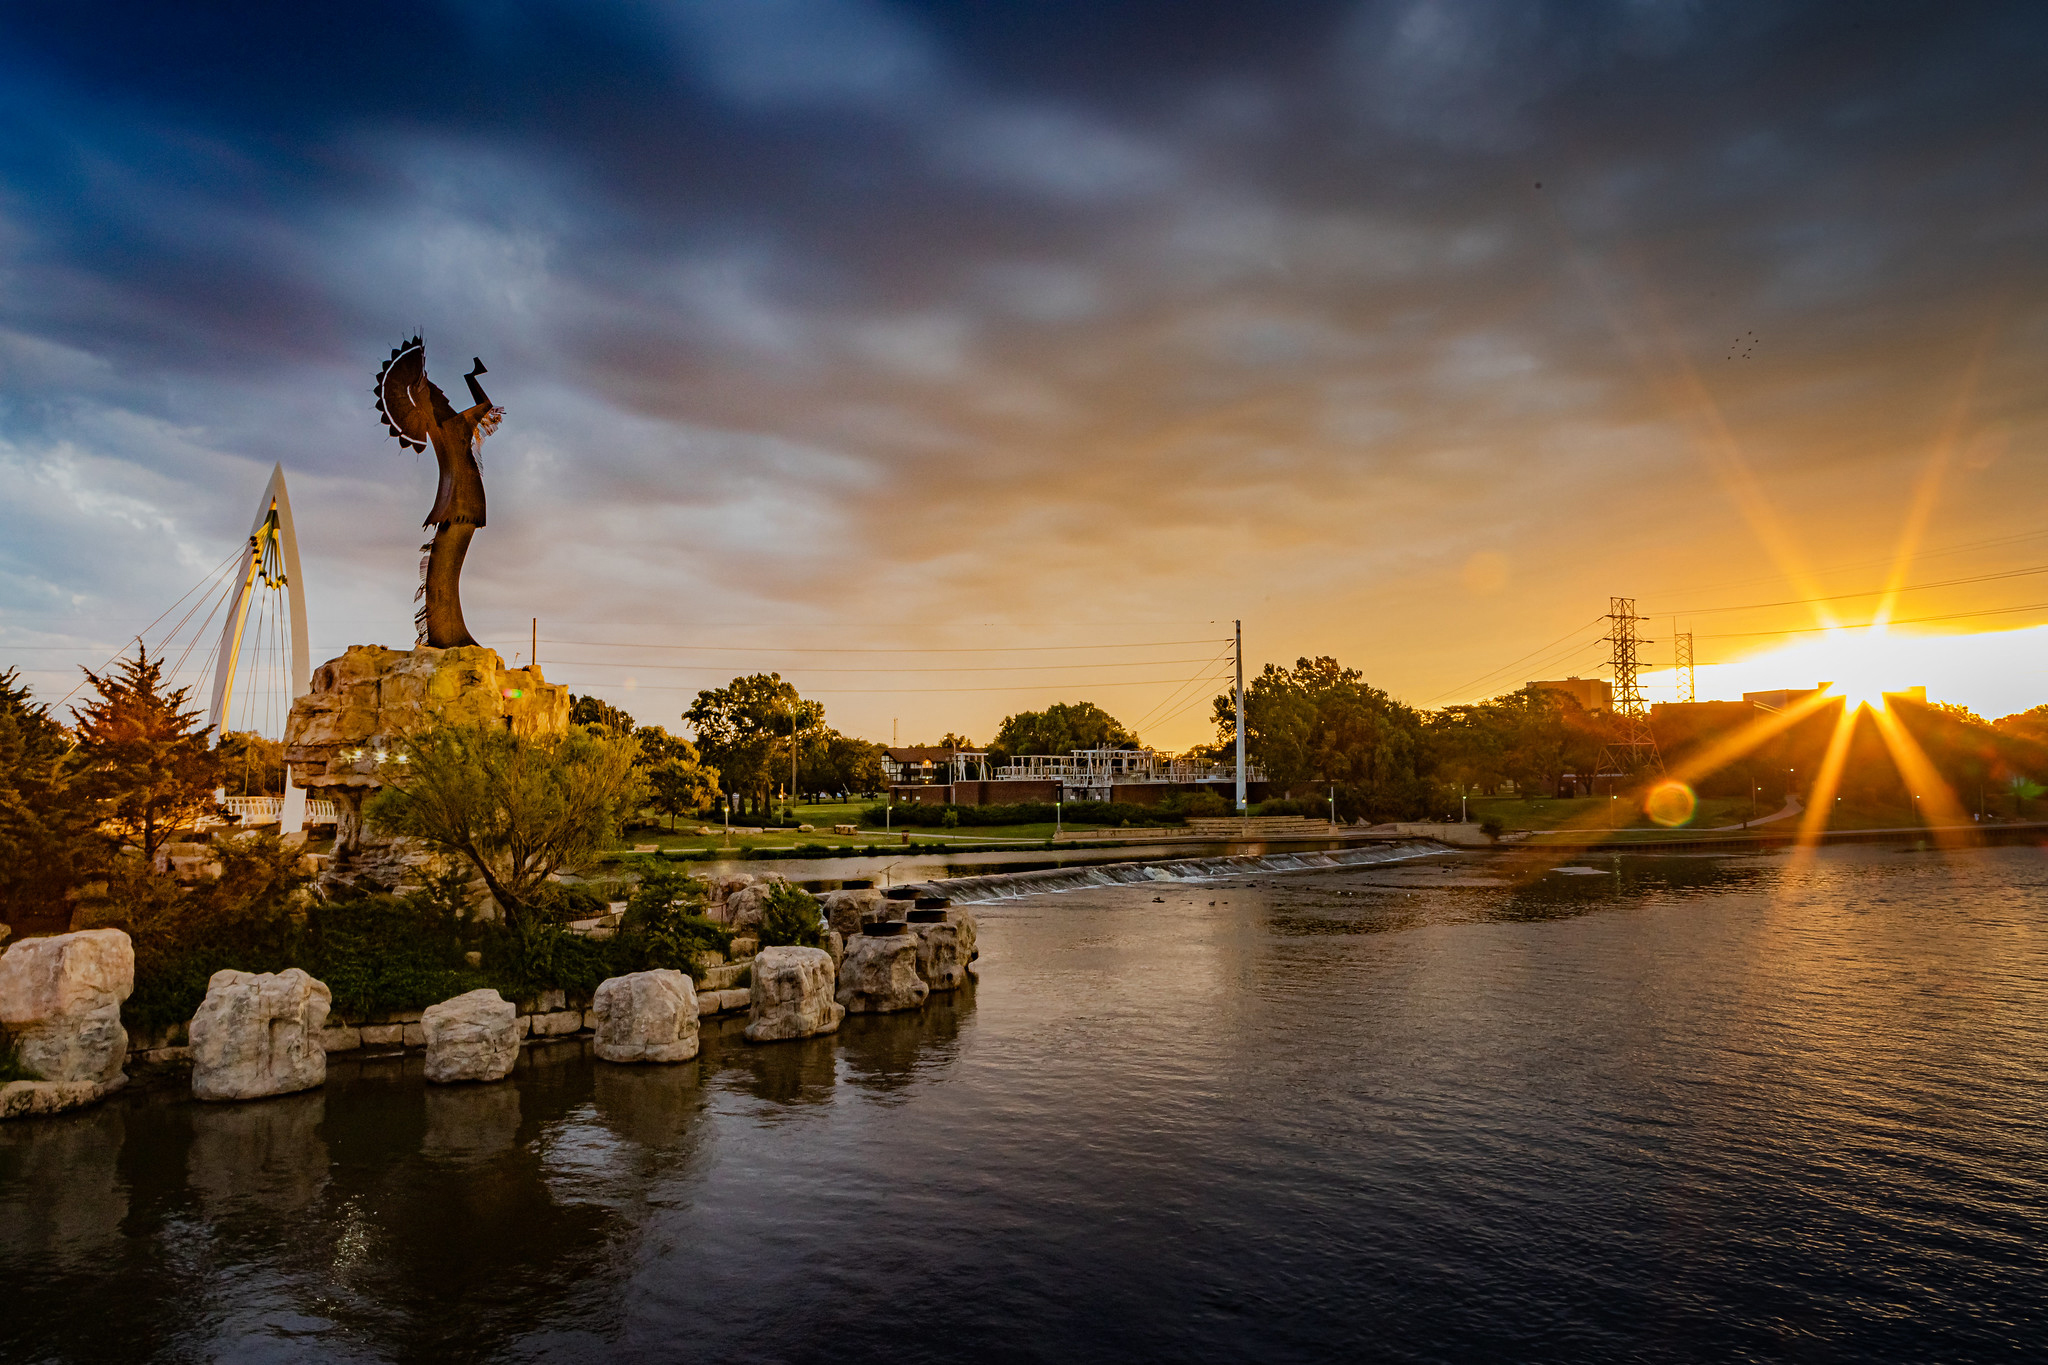 The Keeper of the Plains, a sculpture by Blackbear Bosin, stands over the confluence of the Arkansas and Little Arkansas rivers at dawn. It’s located in the heart of Wichita, Kansas, a jewel in the central plains.